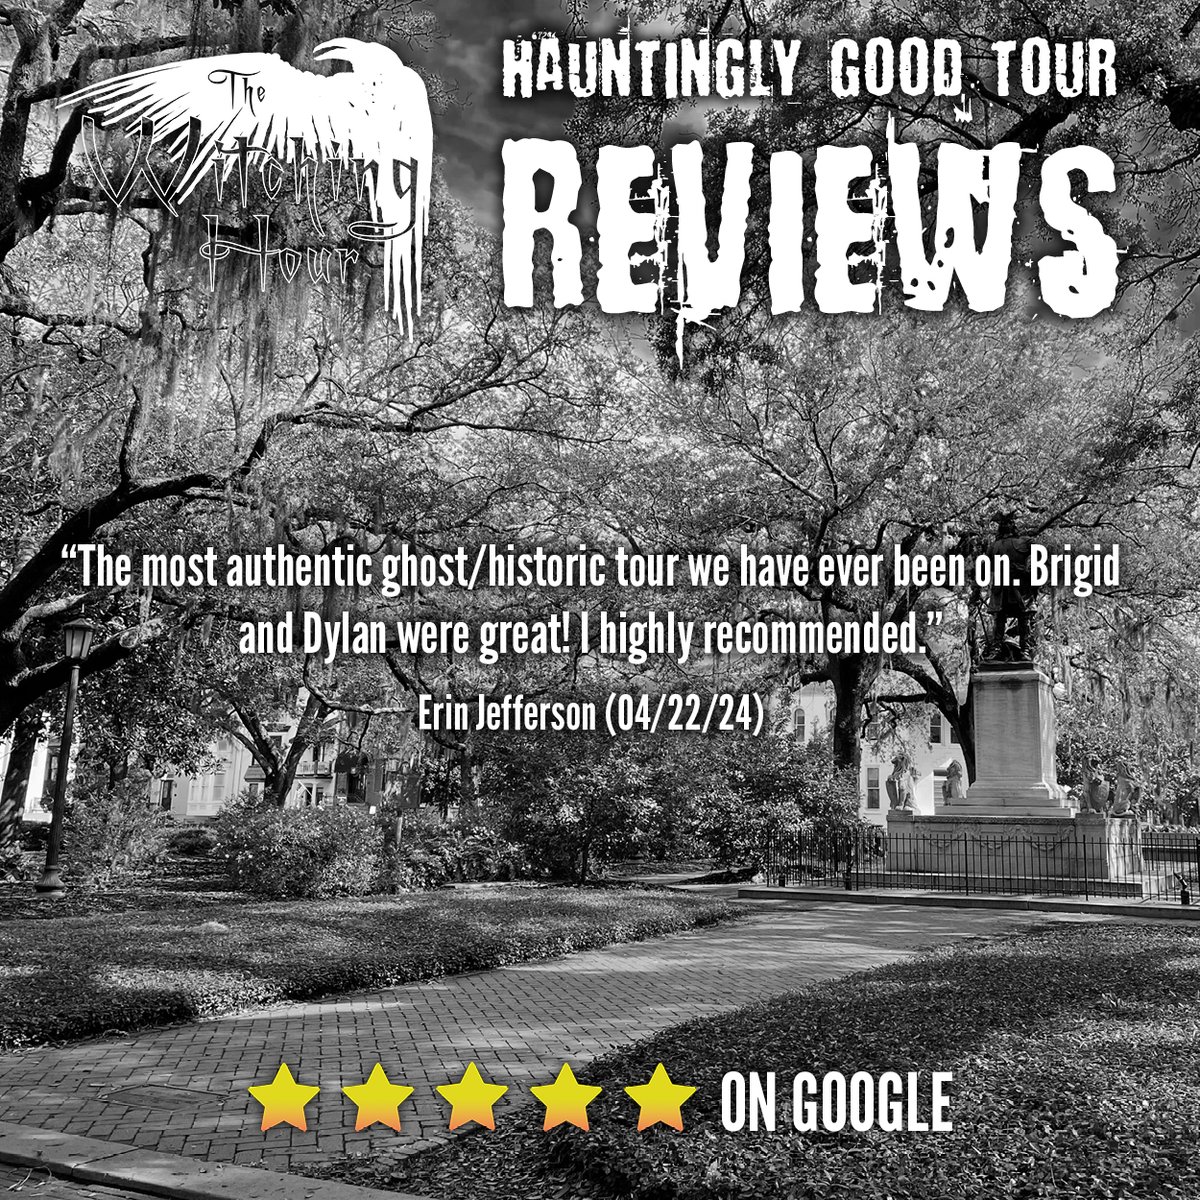 Another 5 star Google Review!
#googlereview #5starreview #visitsavannah #ghosts #haunted #paranormal